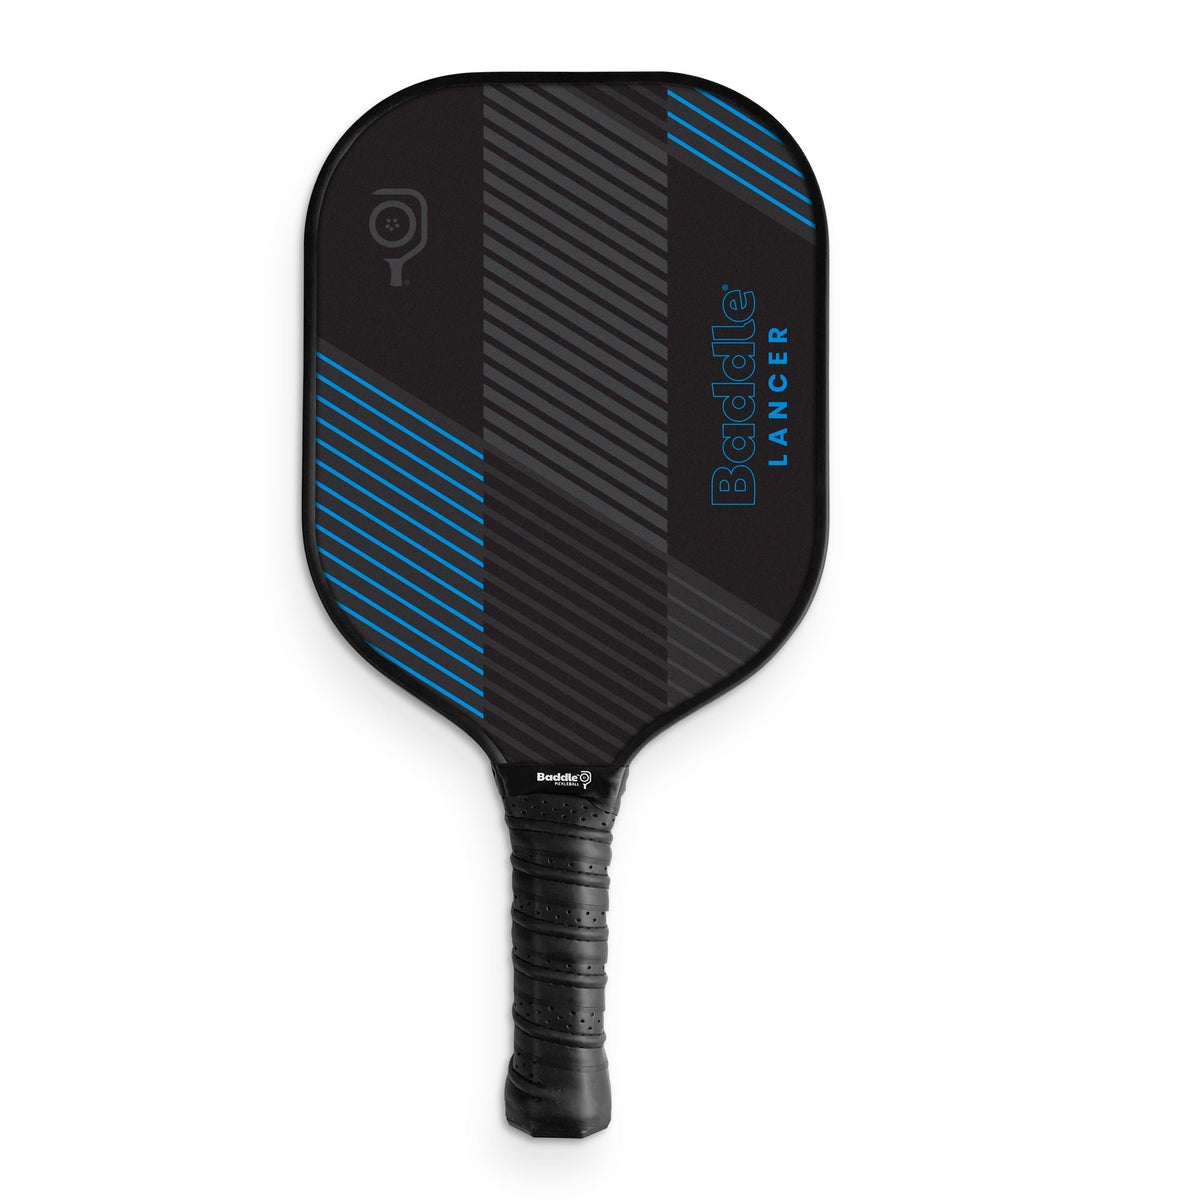 Baddle Lancer Paddle with Cover